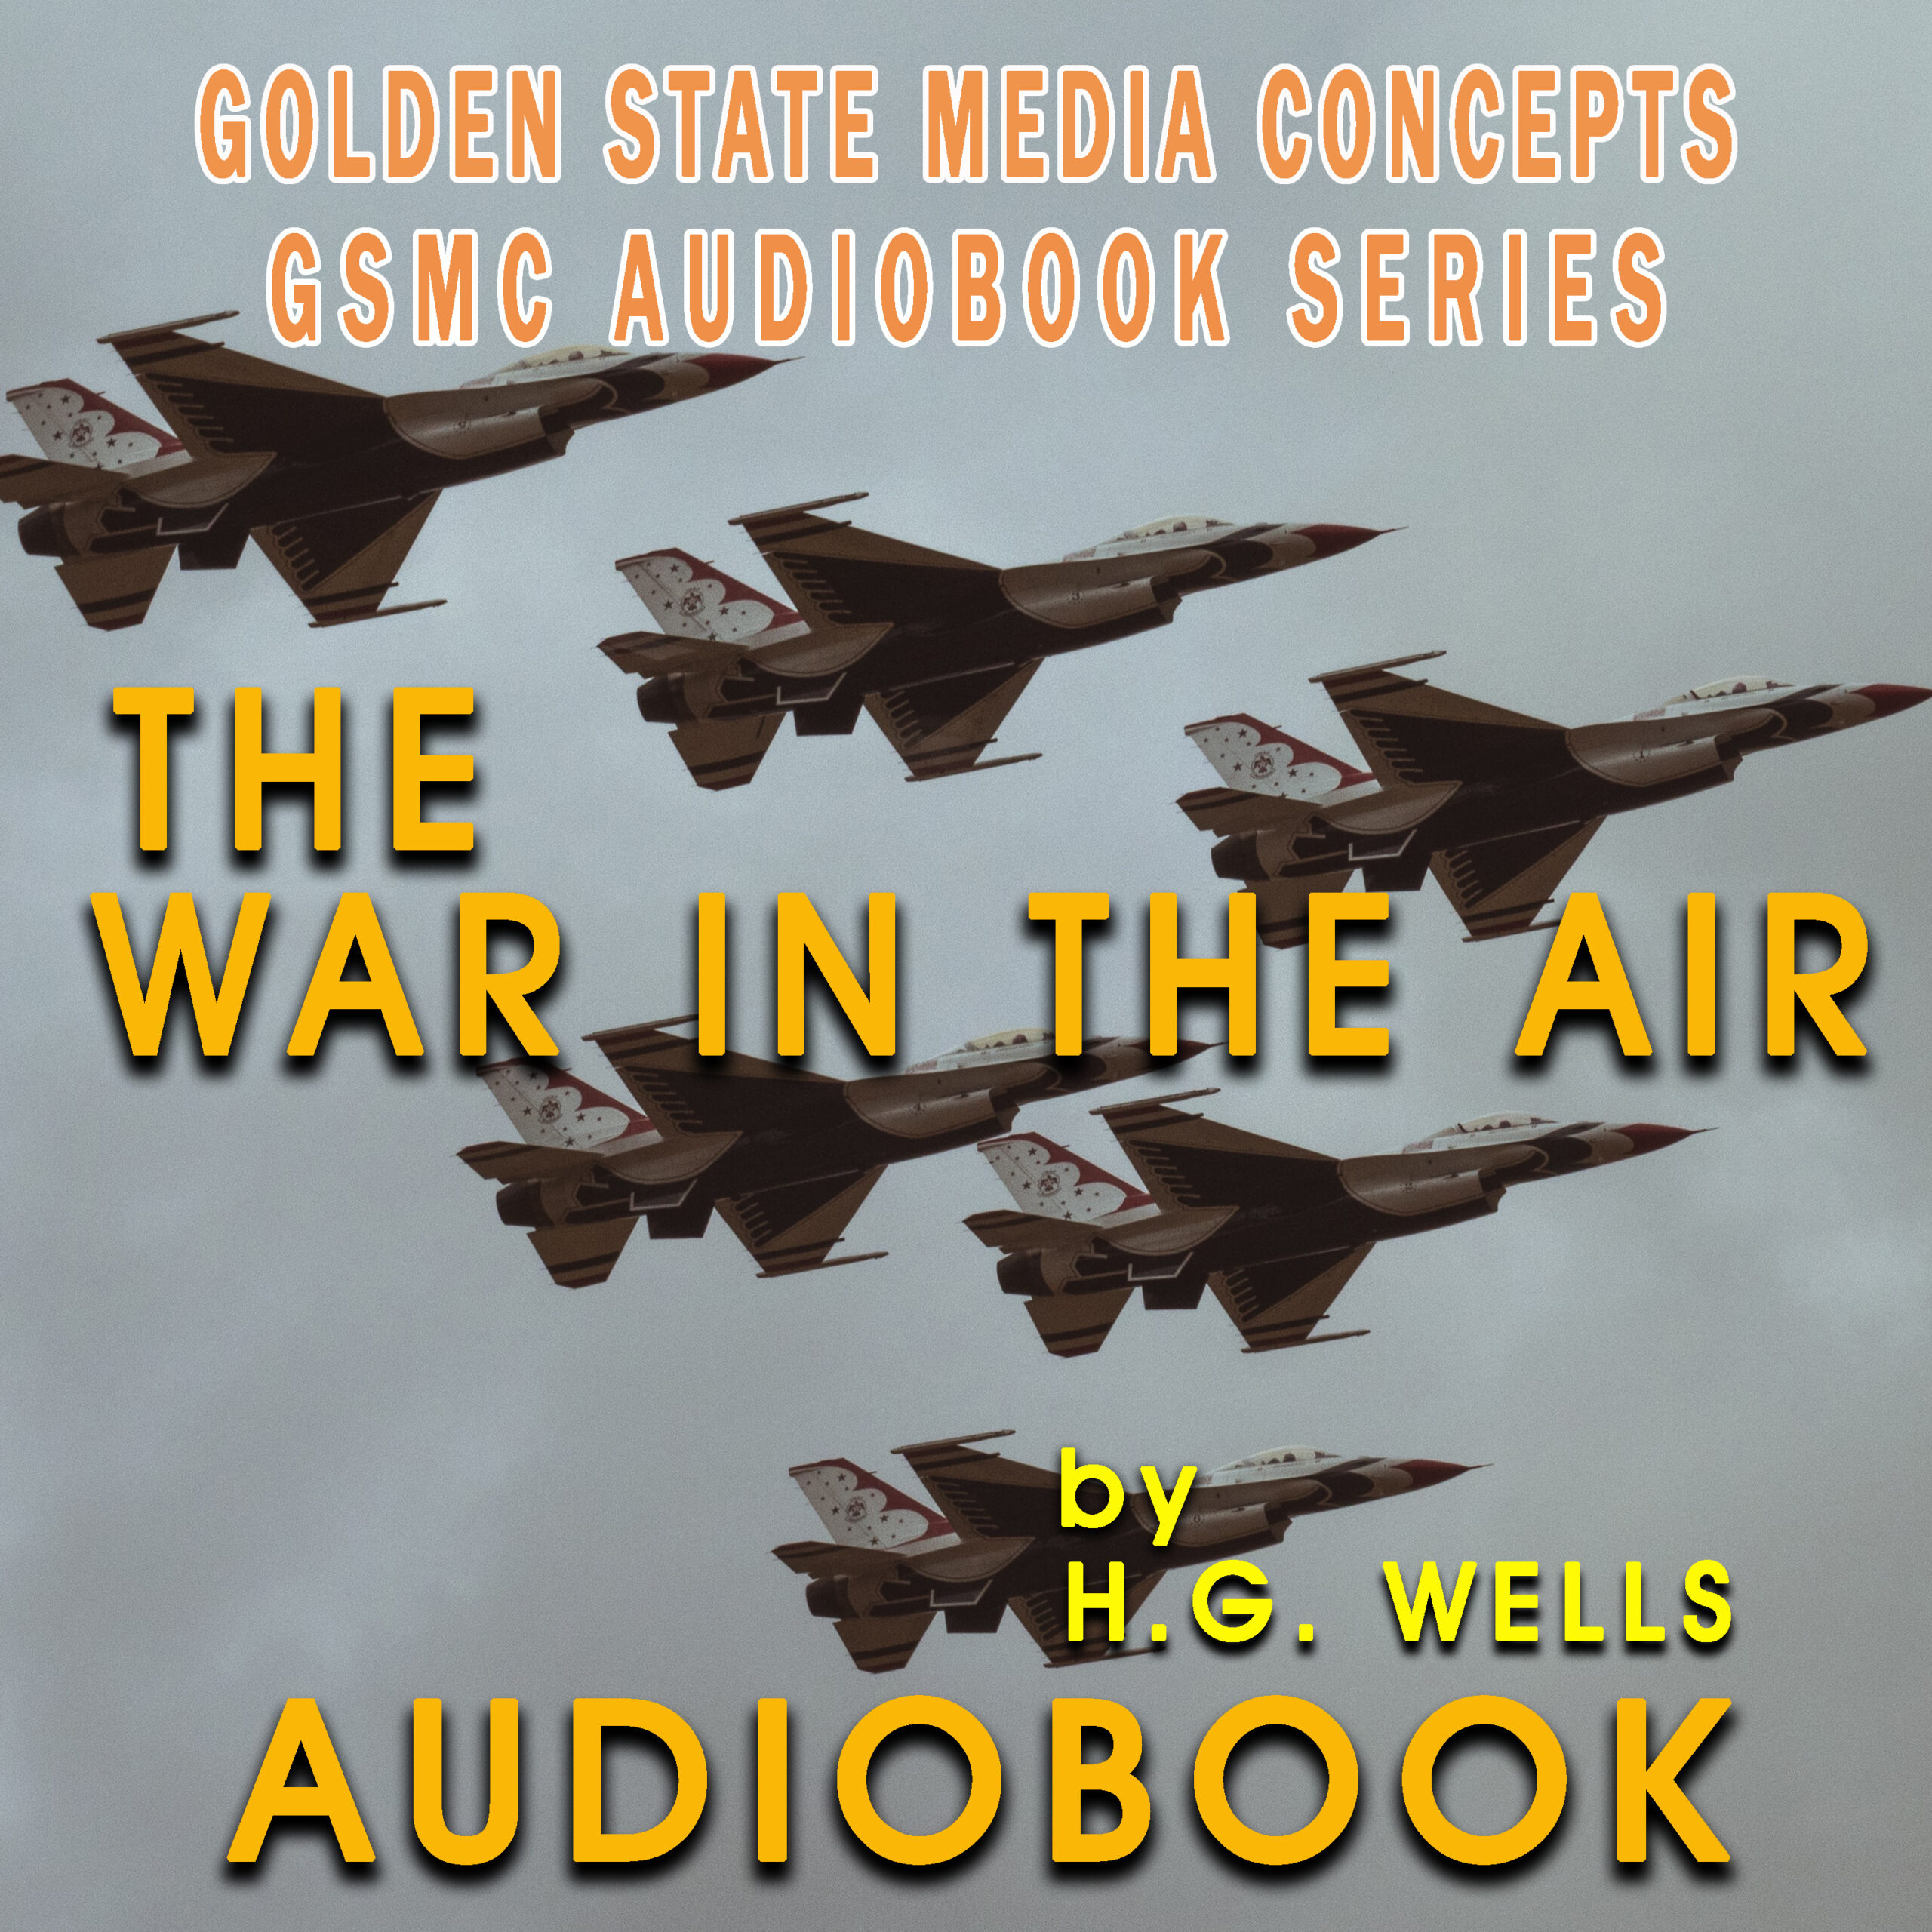 GSMC Audiobook Series: The War in the Air by H.G. Wells